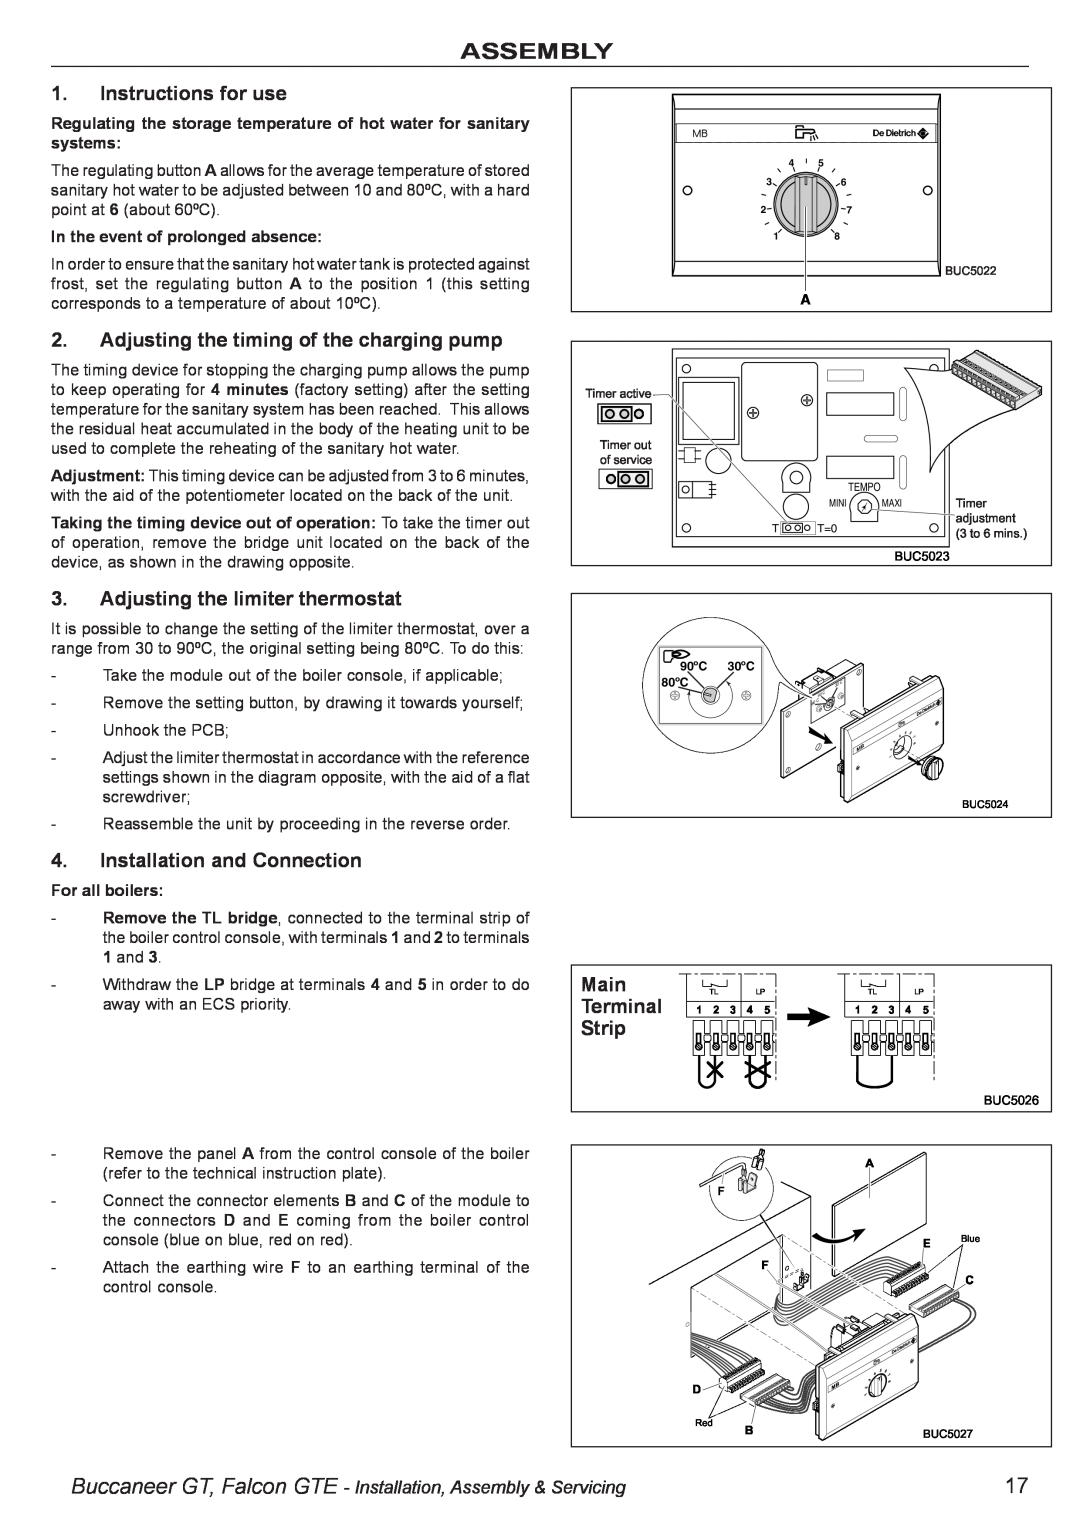 IDEAL INDUSTRIES BUC5034 Instructions for use, Adjusting the timing of the charging pump, Adjusting the limiter thermostat 